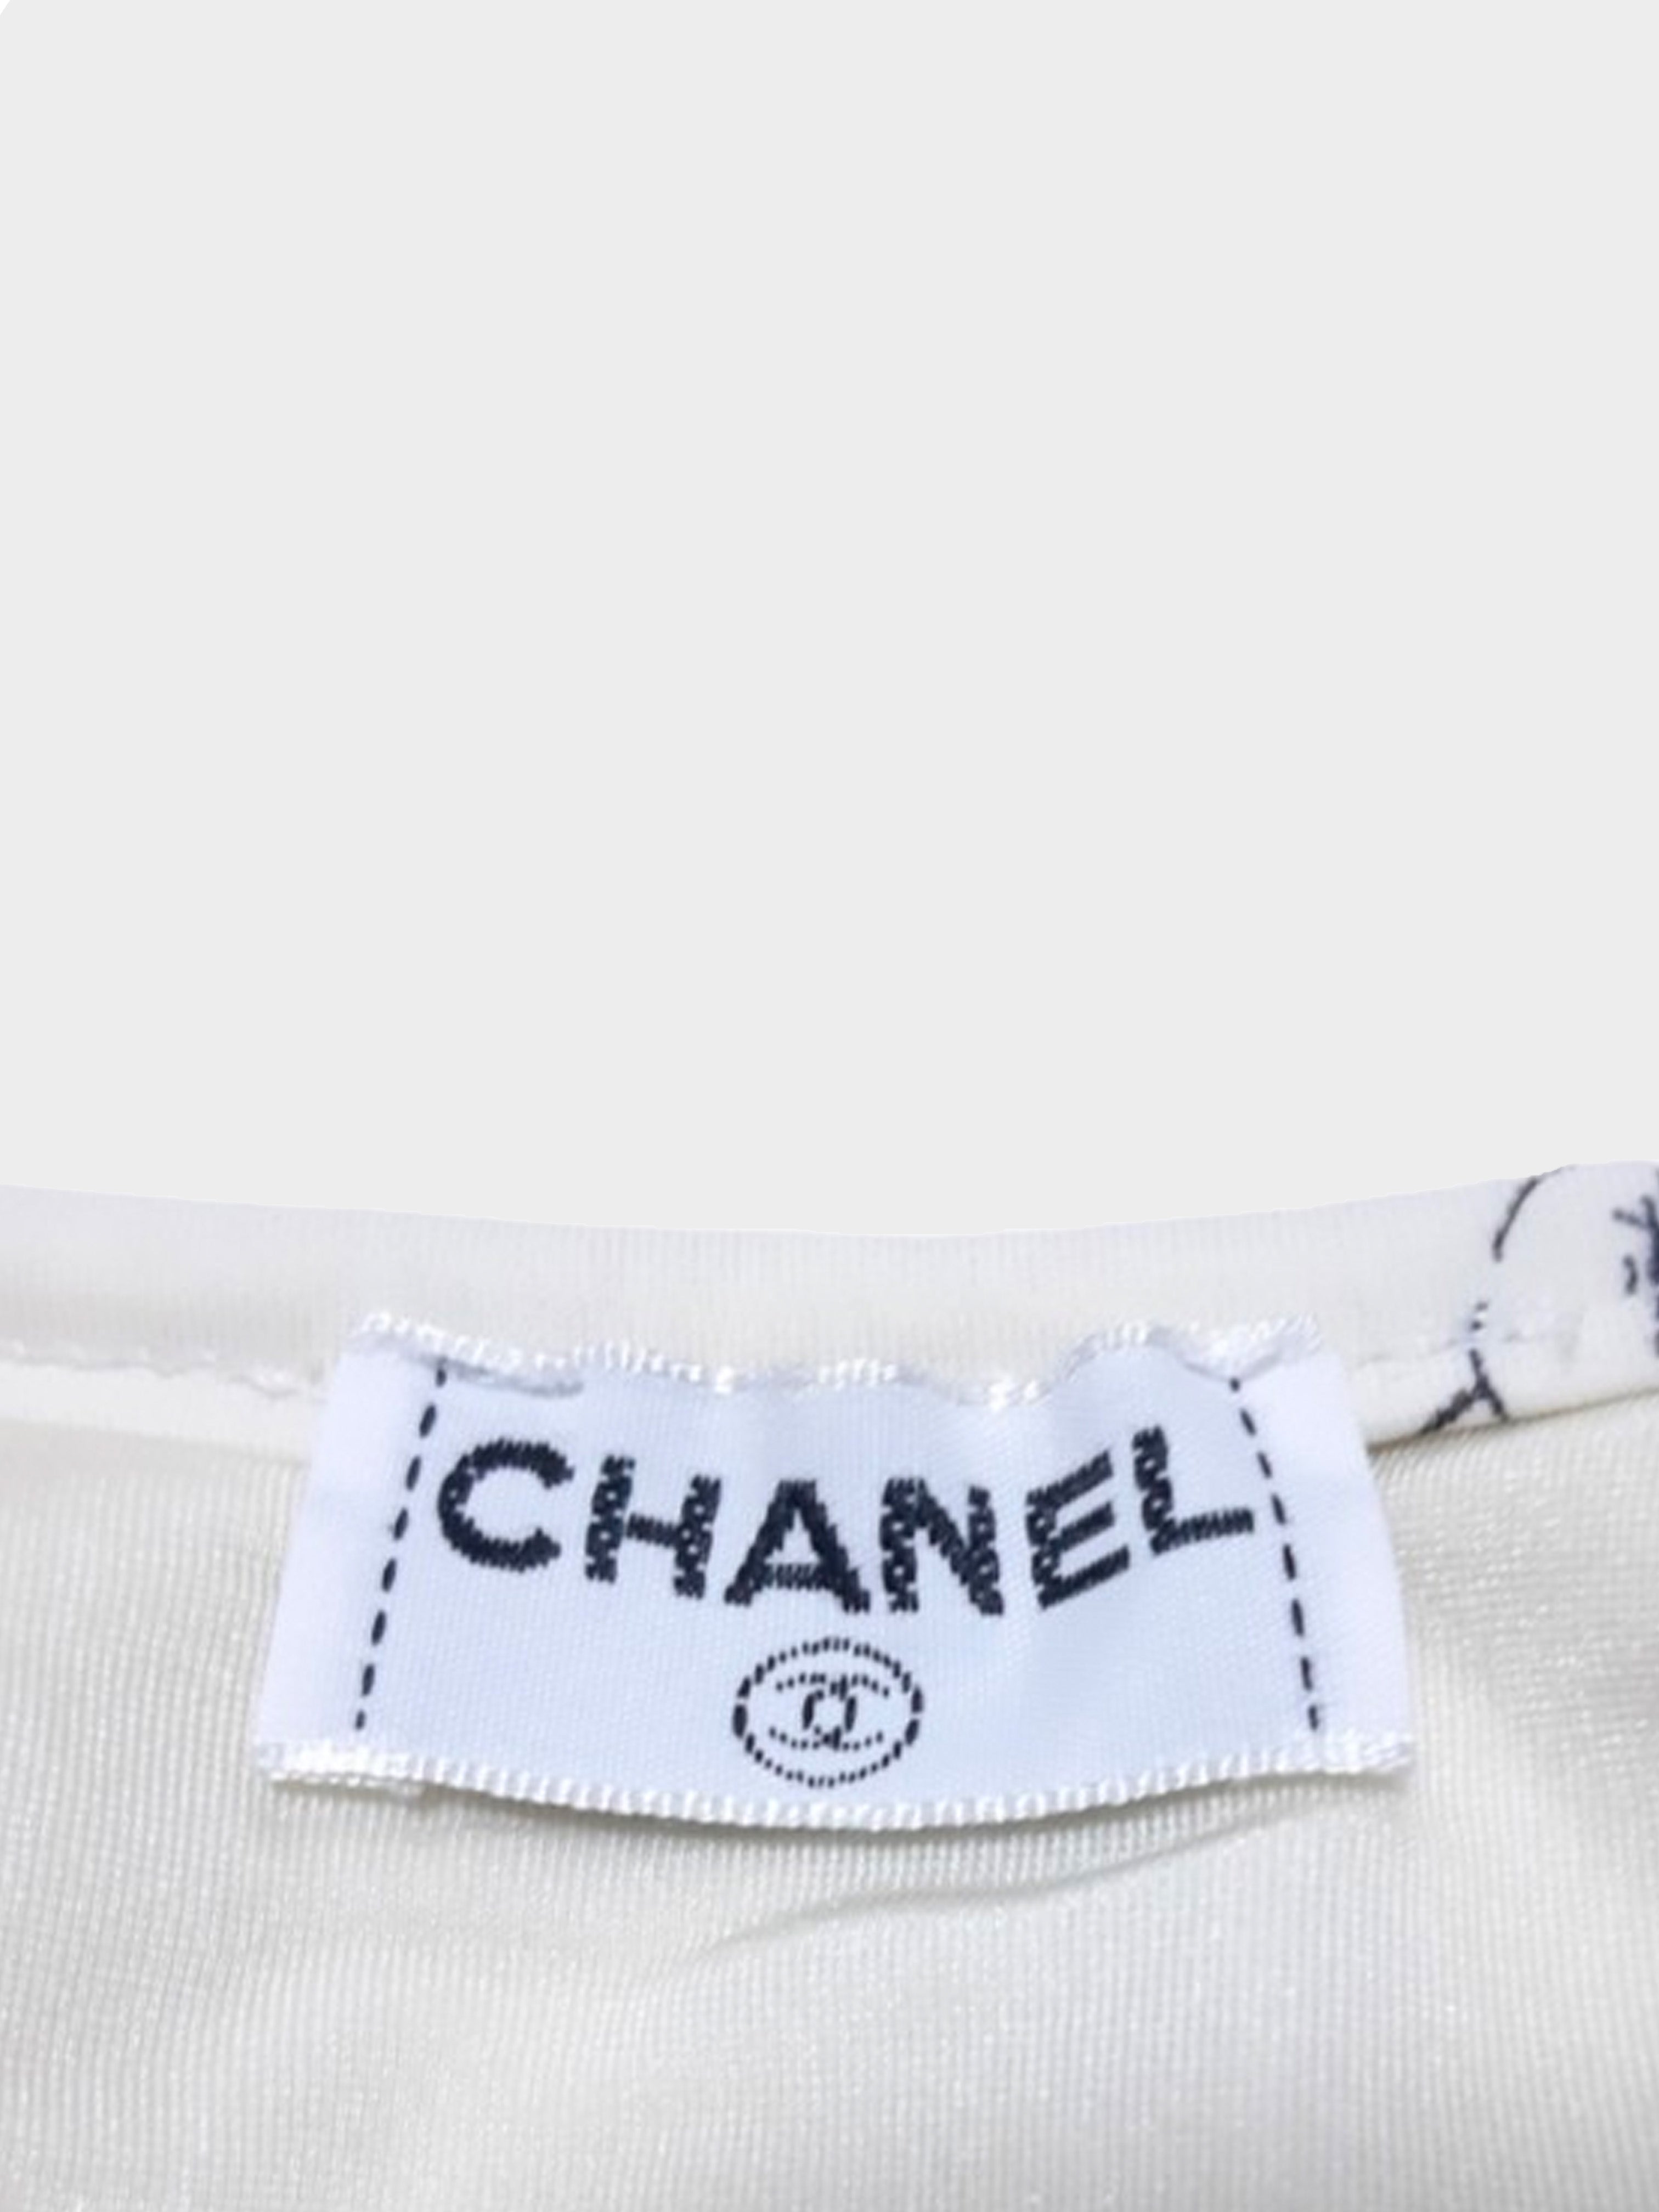 Chanel Spring 1996 Icon Print Swimsuit